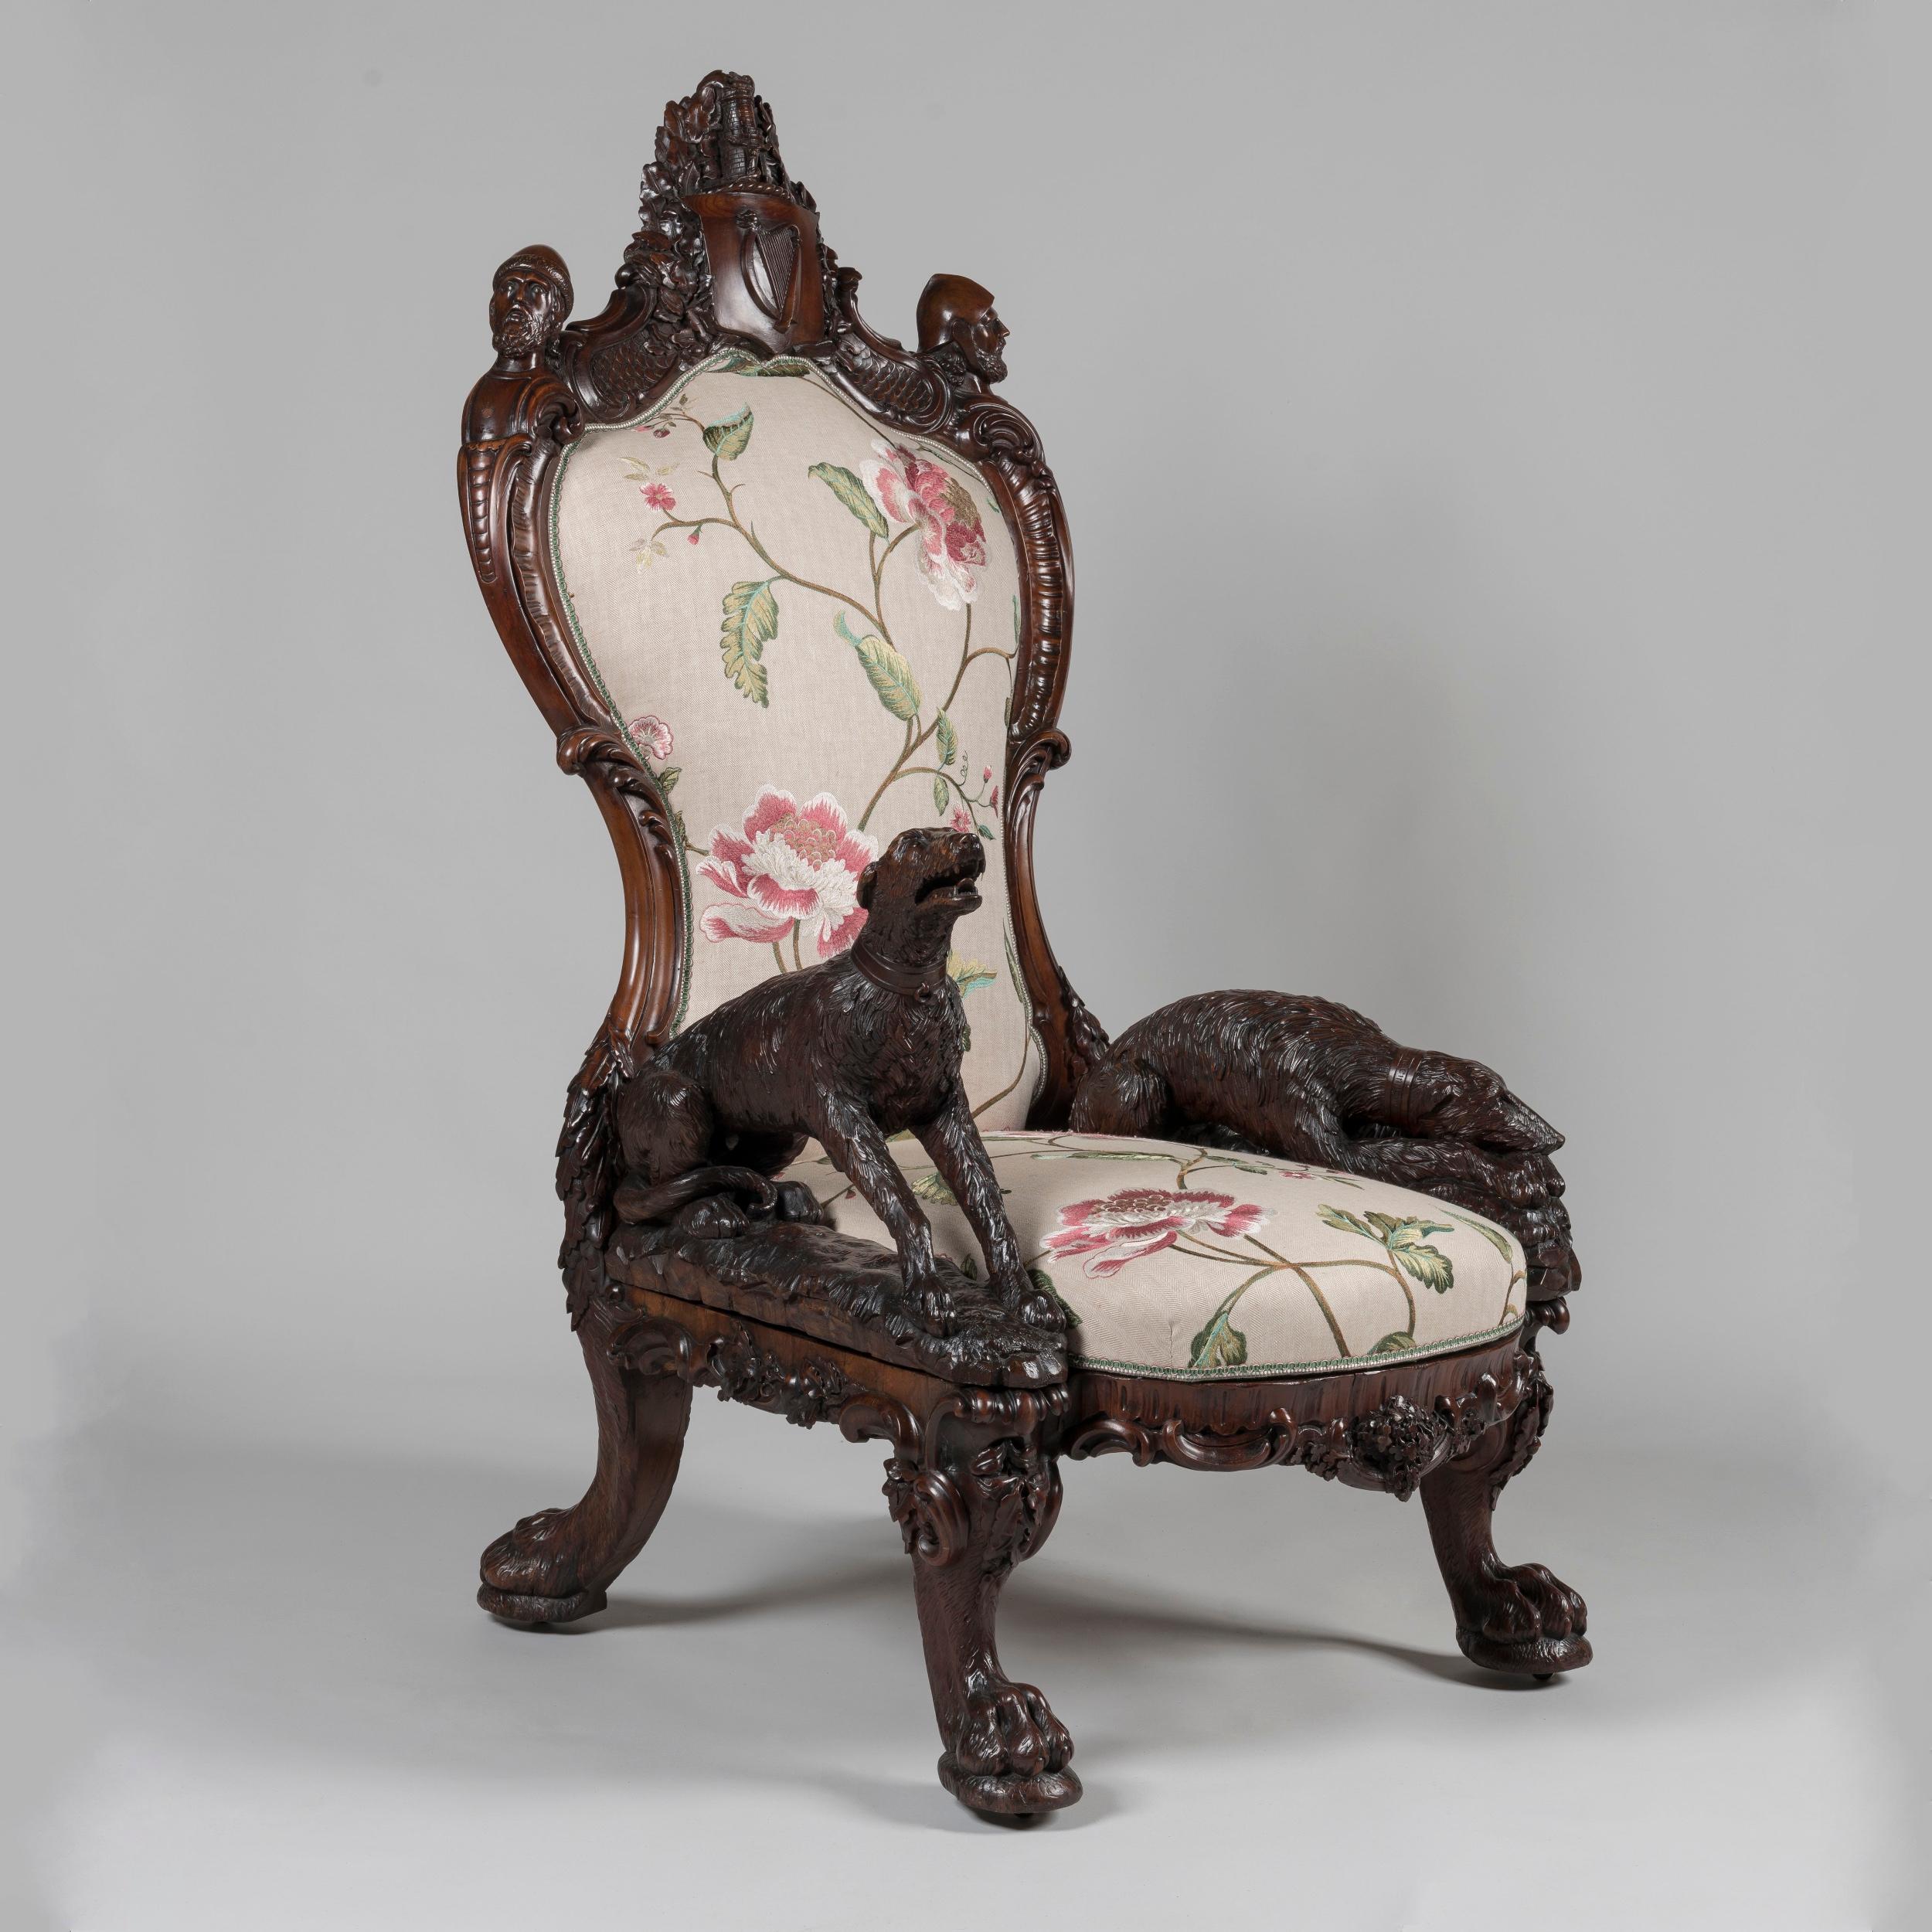 *Winner of the 2022 Masterpiece Fair Furniture Highlight*

The 1851 Great Exhibition Carved Bog Yew Armchair
by Arthur Jones of Dublin

Carved entirely from Irish bog yew wood, a timber celebrated for its rarity and its ability to achieve a